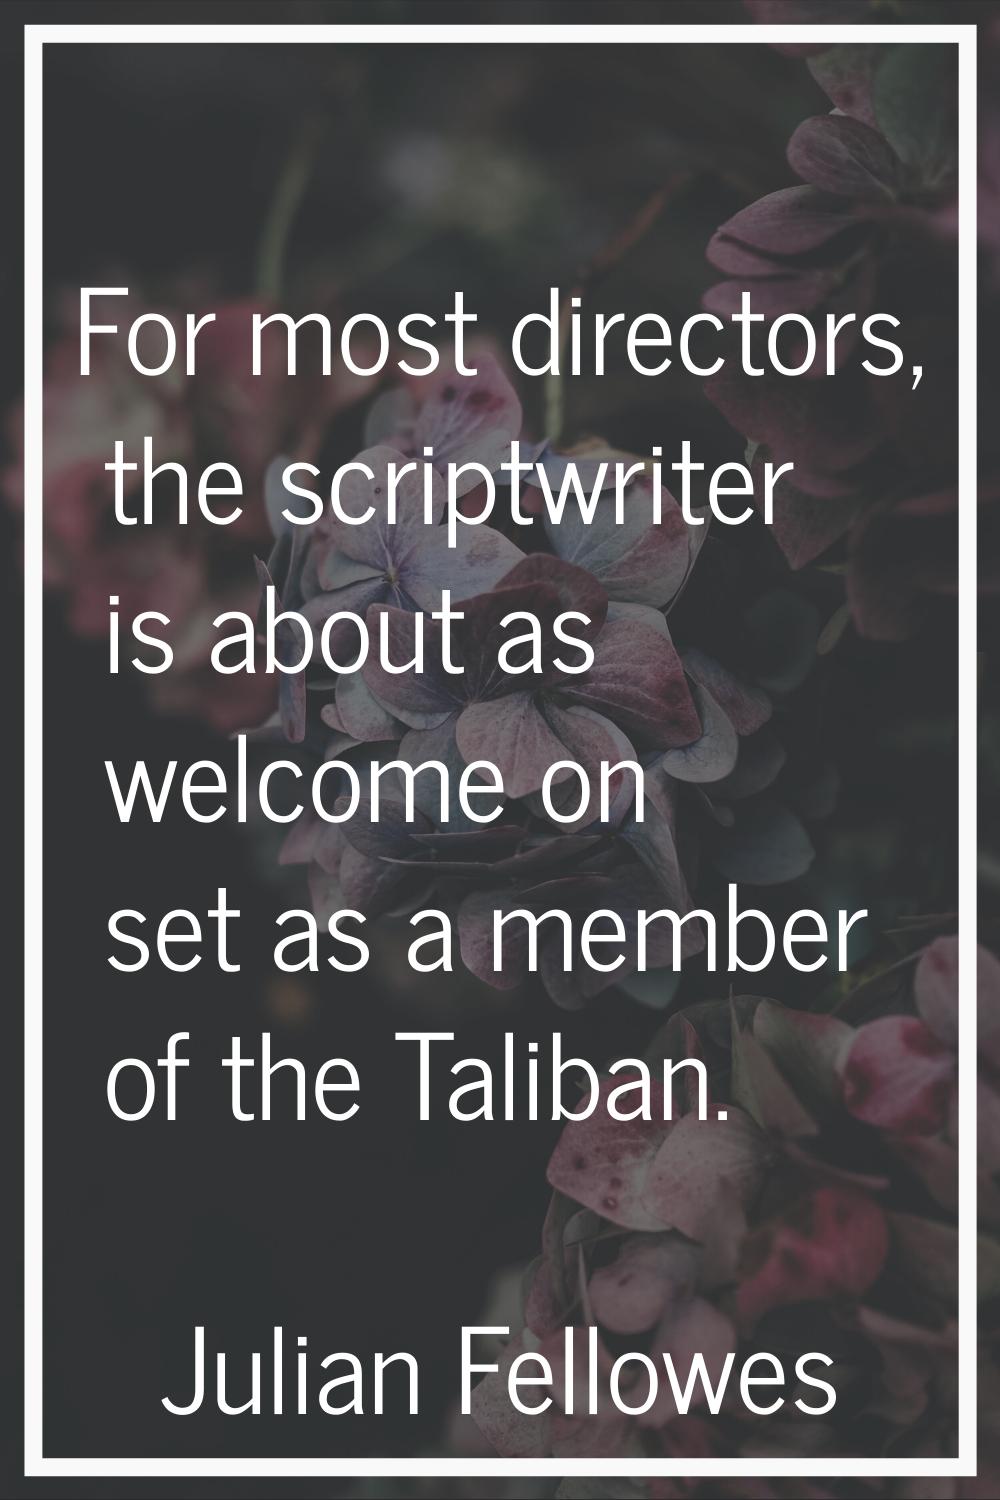 For most directors, the scriptwriter is about as welcome on set as a member of the Taliban.